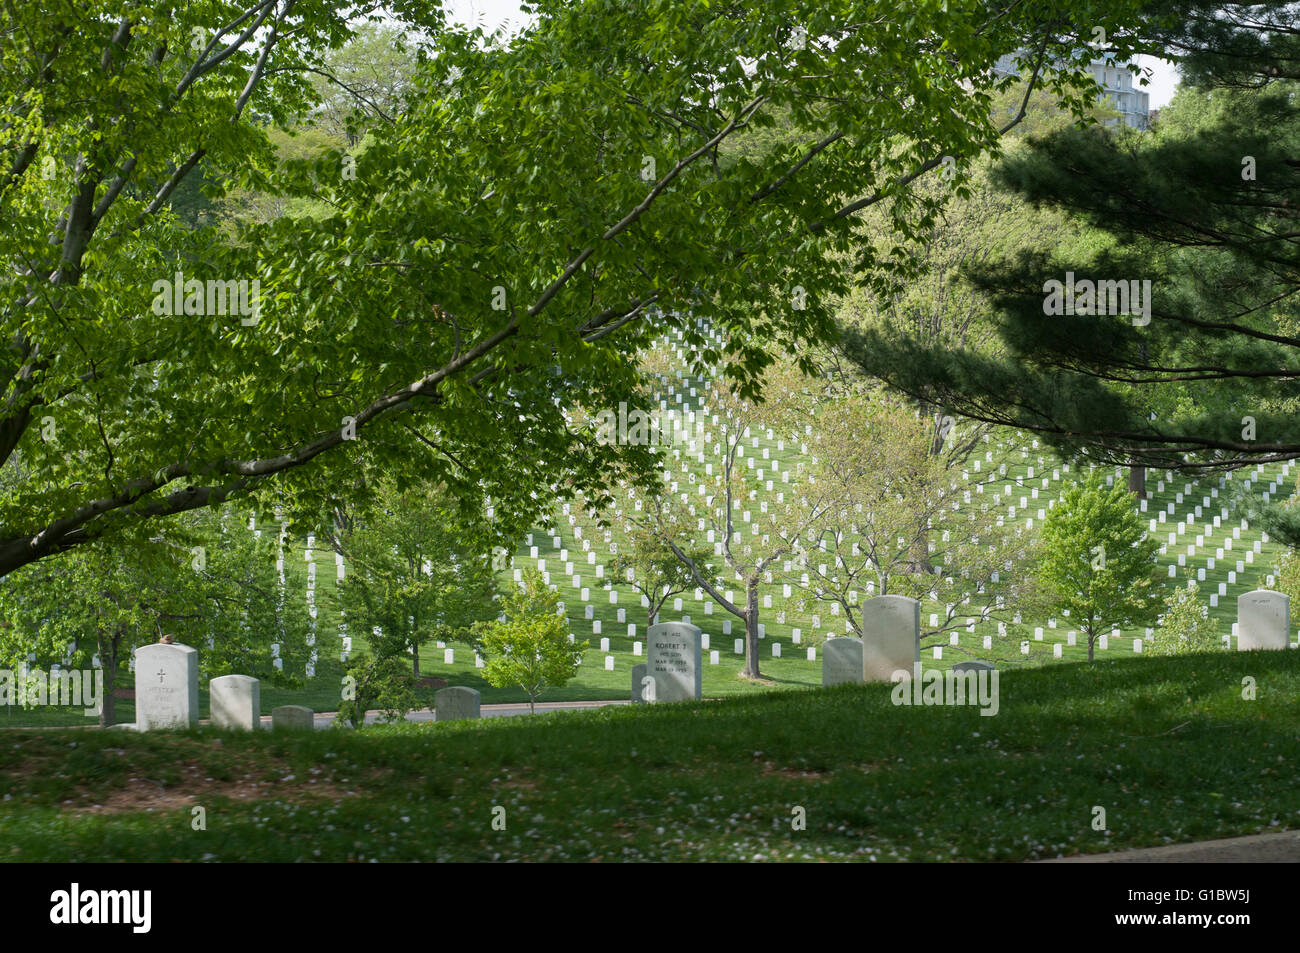 A view of some of the graves at Arlington National Cemetery Stock Photo